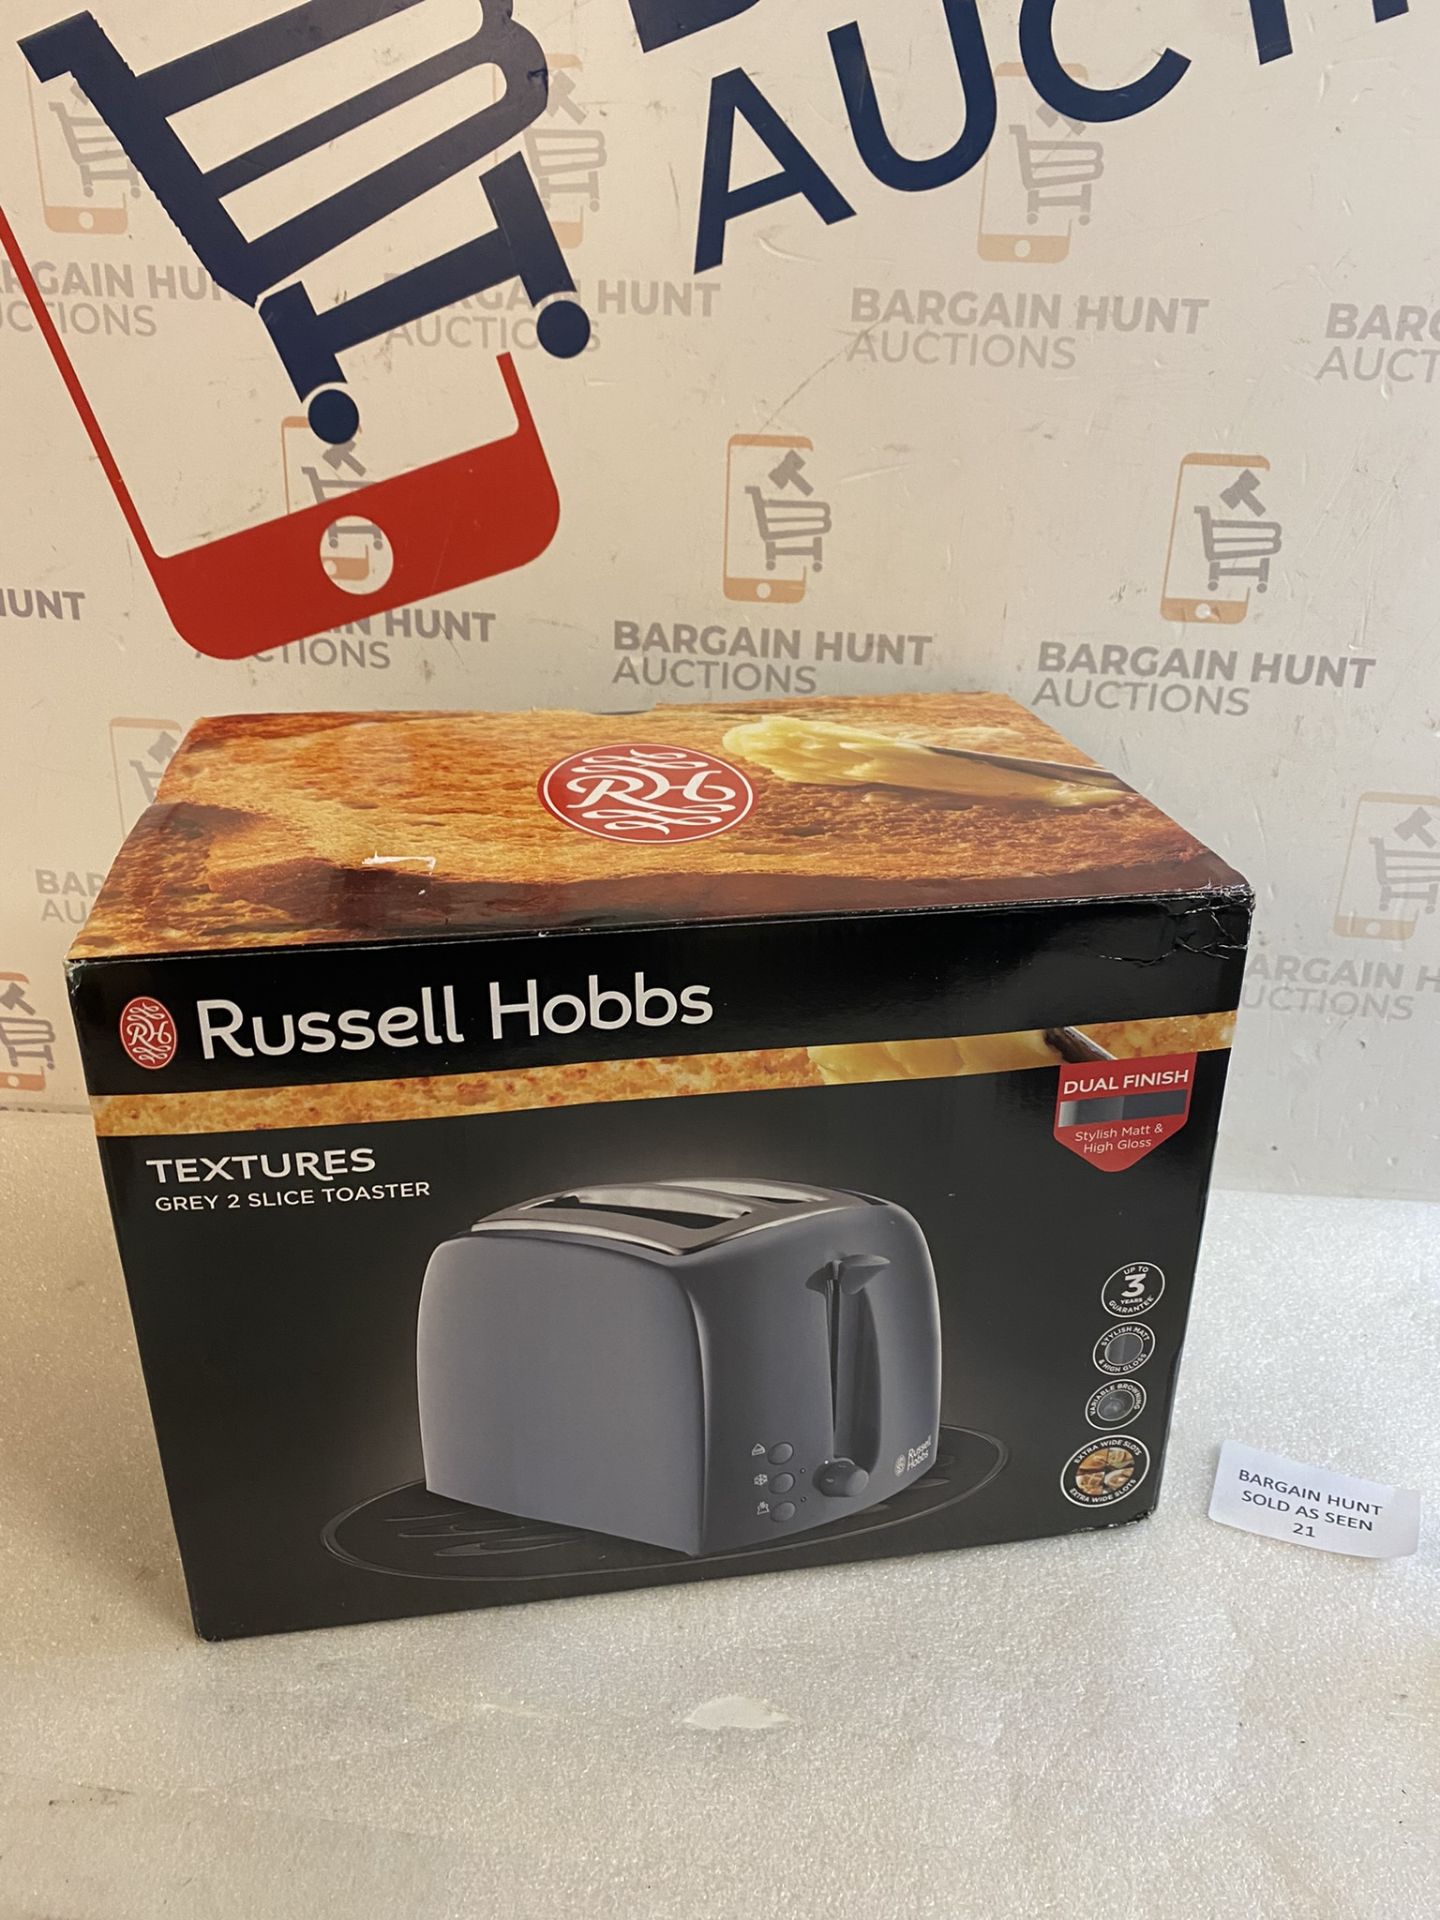 Russell Hobbs 21644 Textures 2-Slice Toaster RRP £20.99